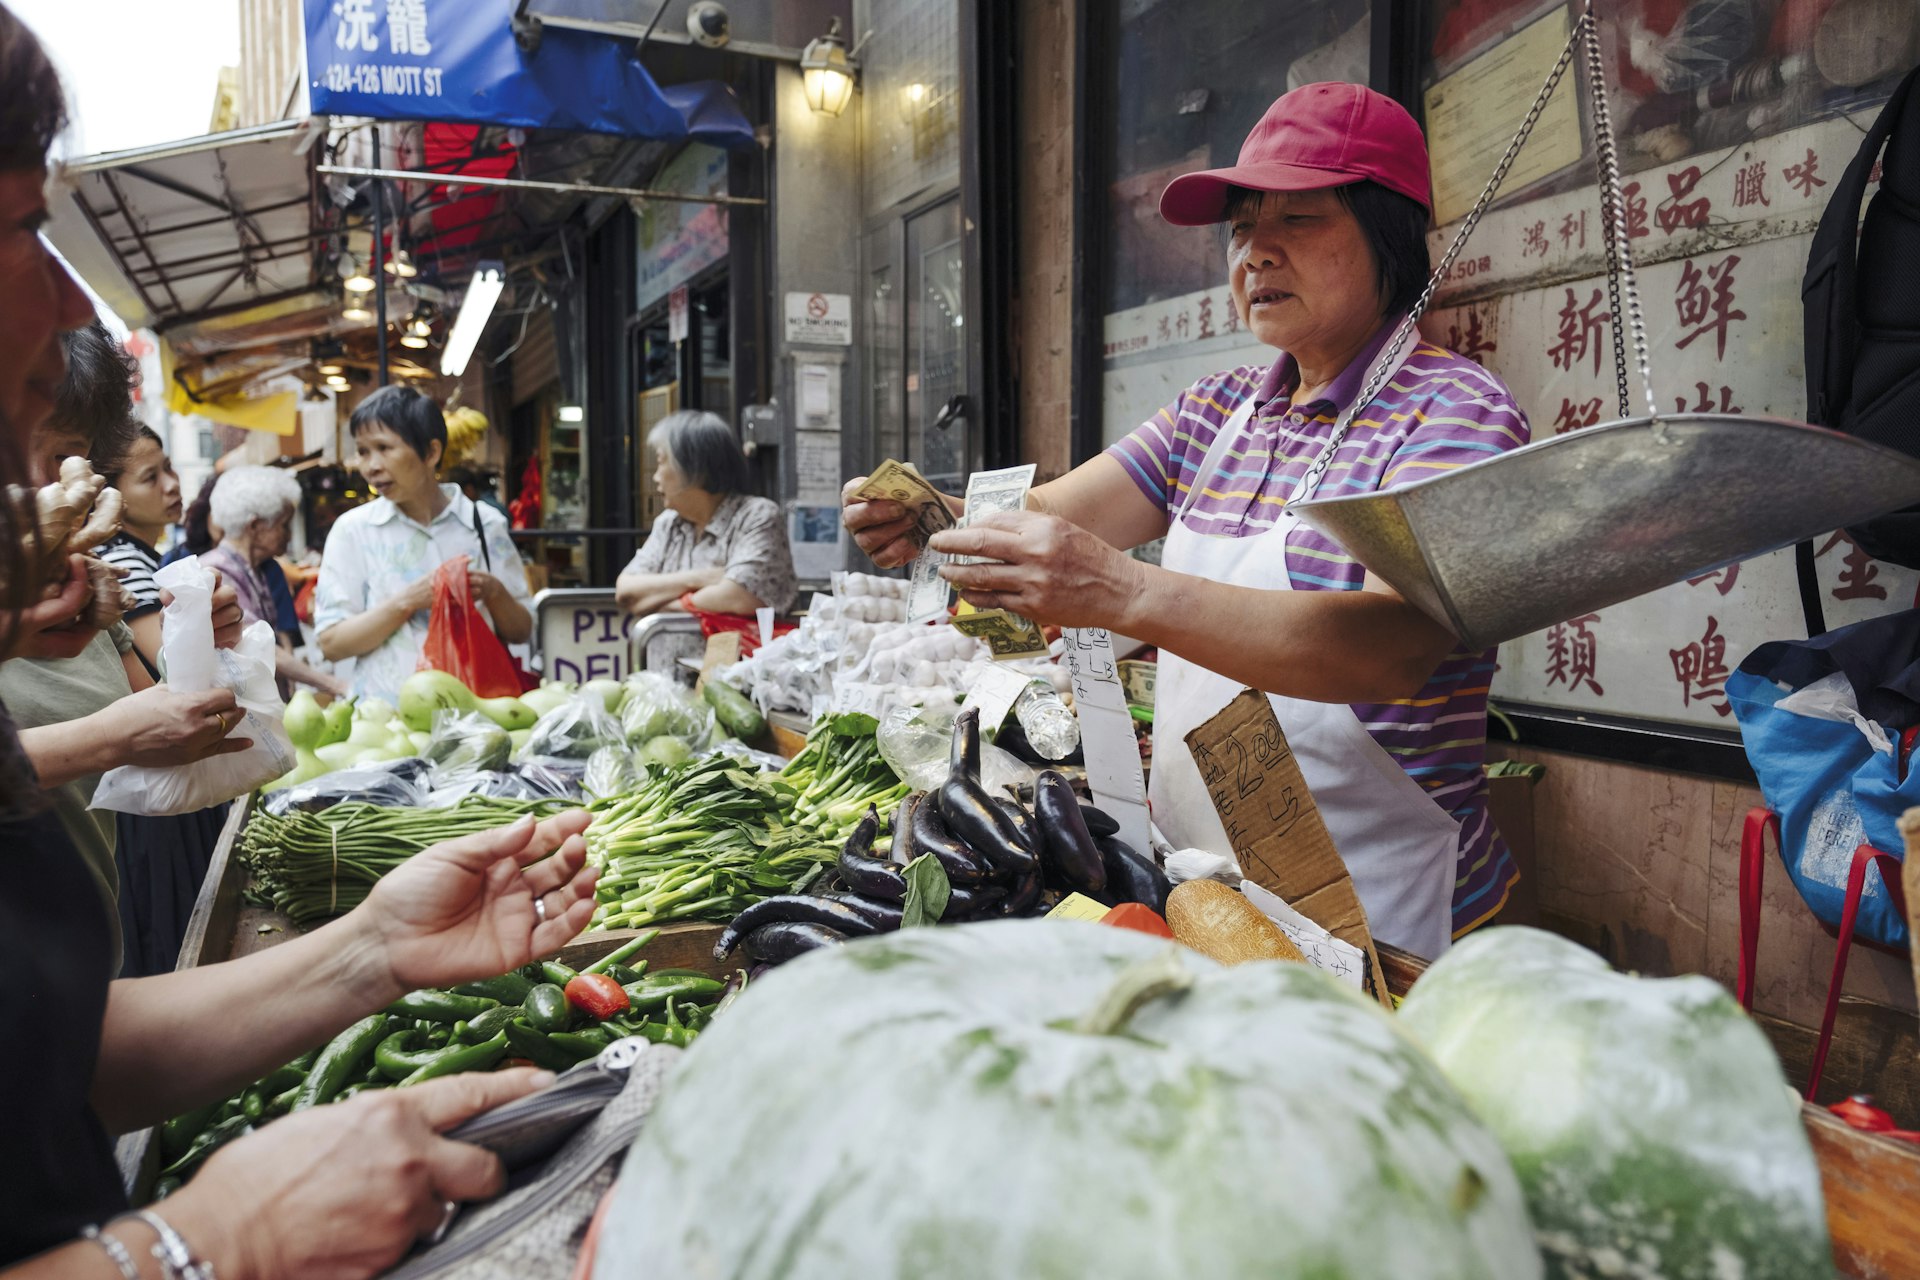 A street vendor selling produce in Chinatown, New York, and counting money. 